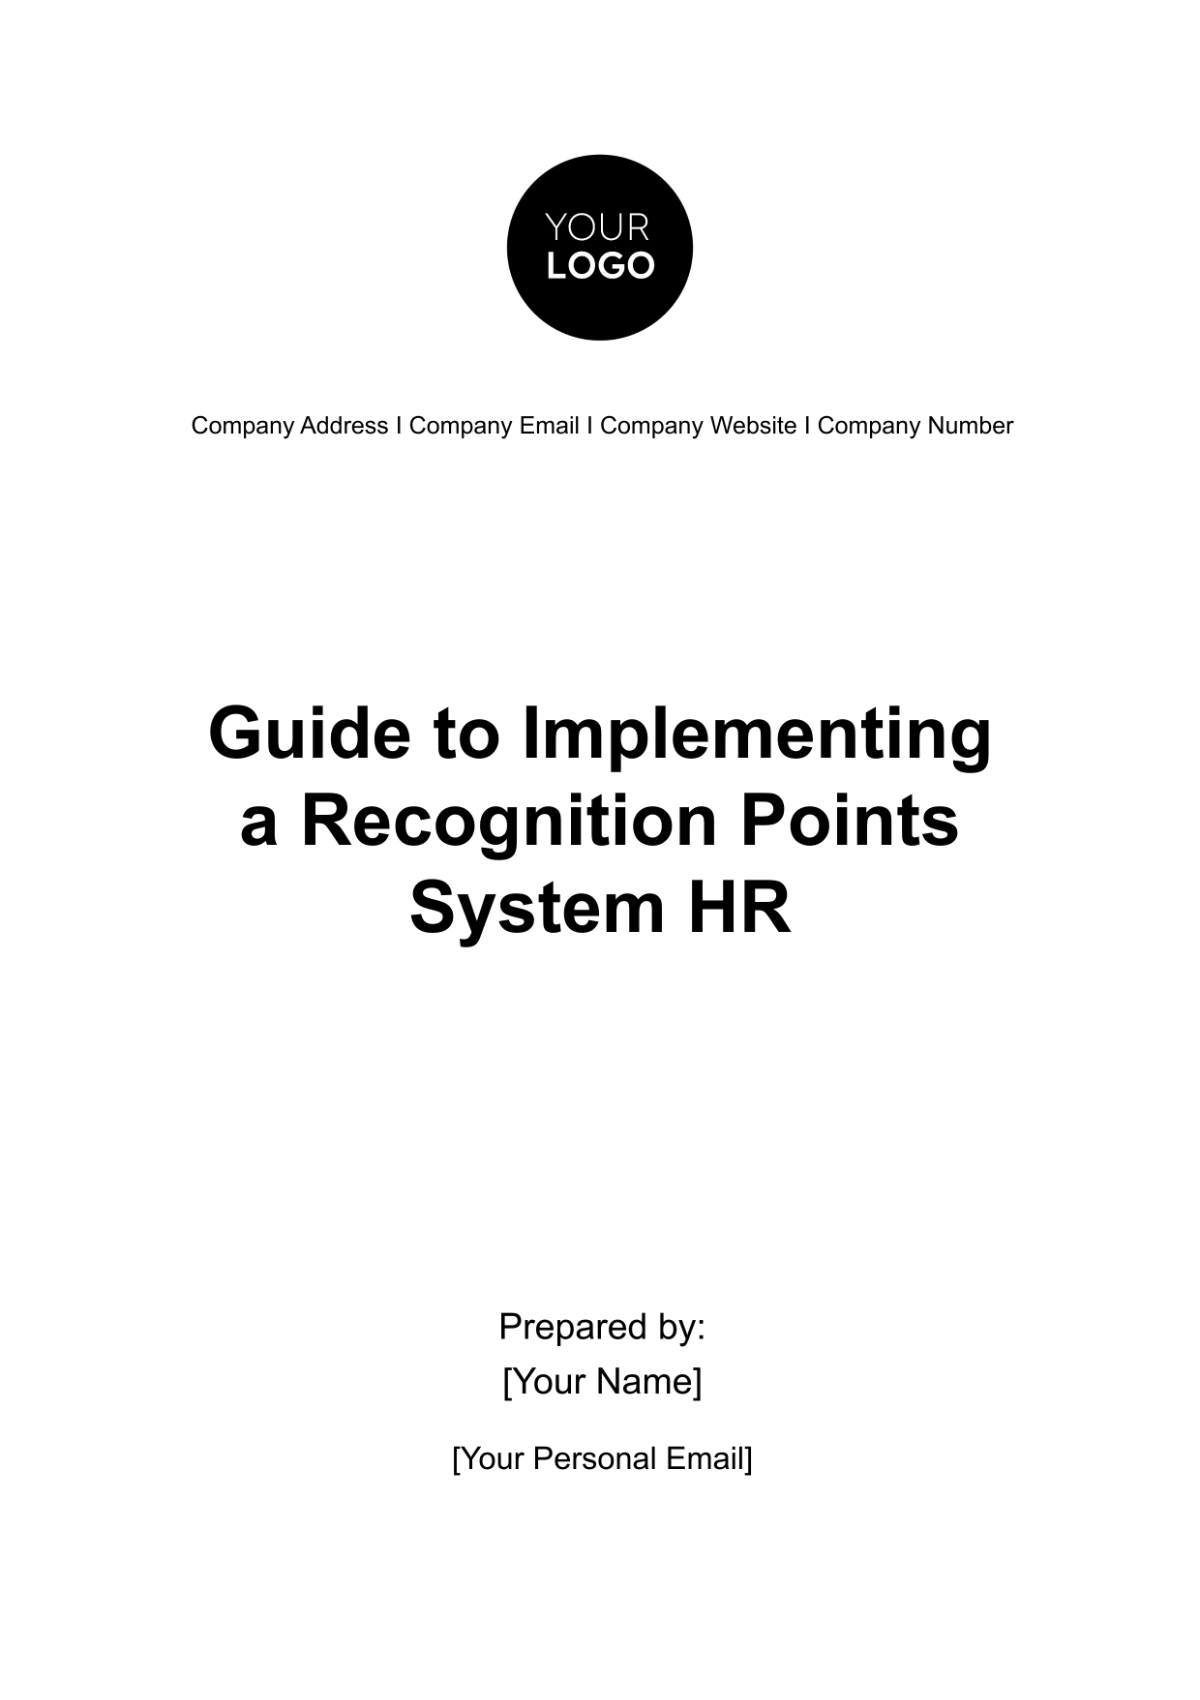 Guide to Implementing a Recognition Points System HR Template